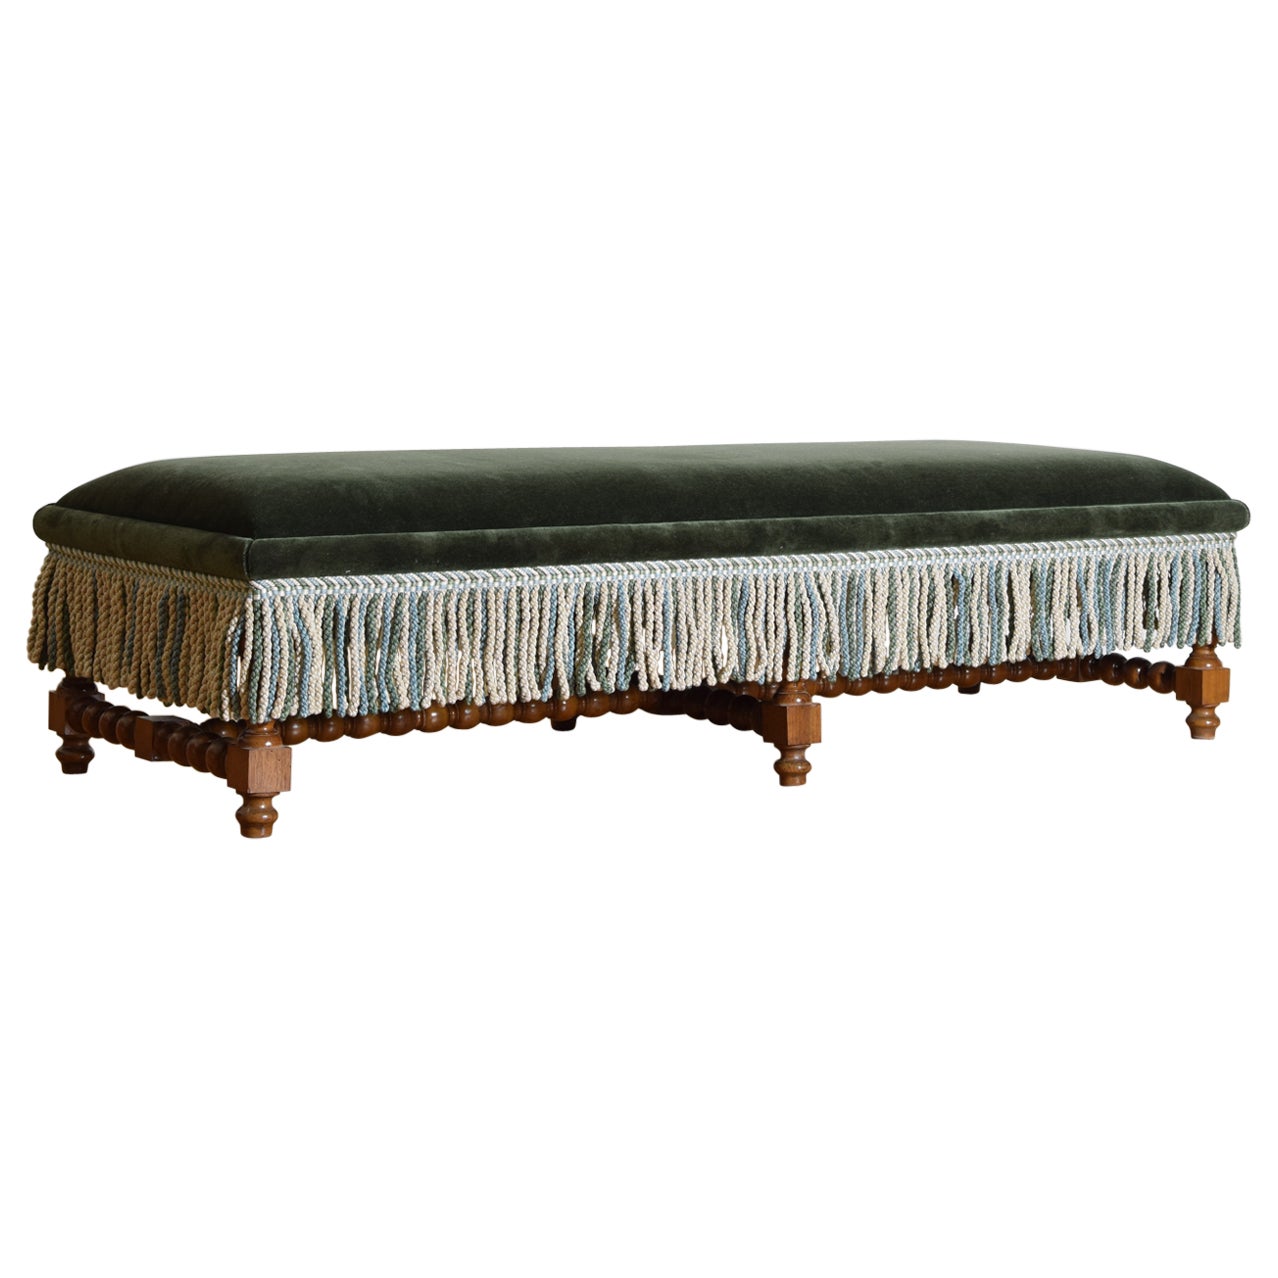 Italian Louis XIII Style Light Walnut & Upholstered Large Bench, 2nd half 19thc For Sale